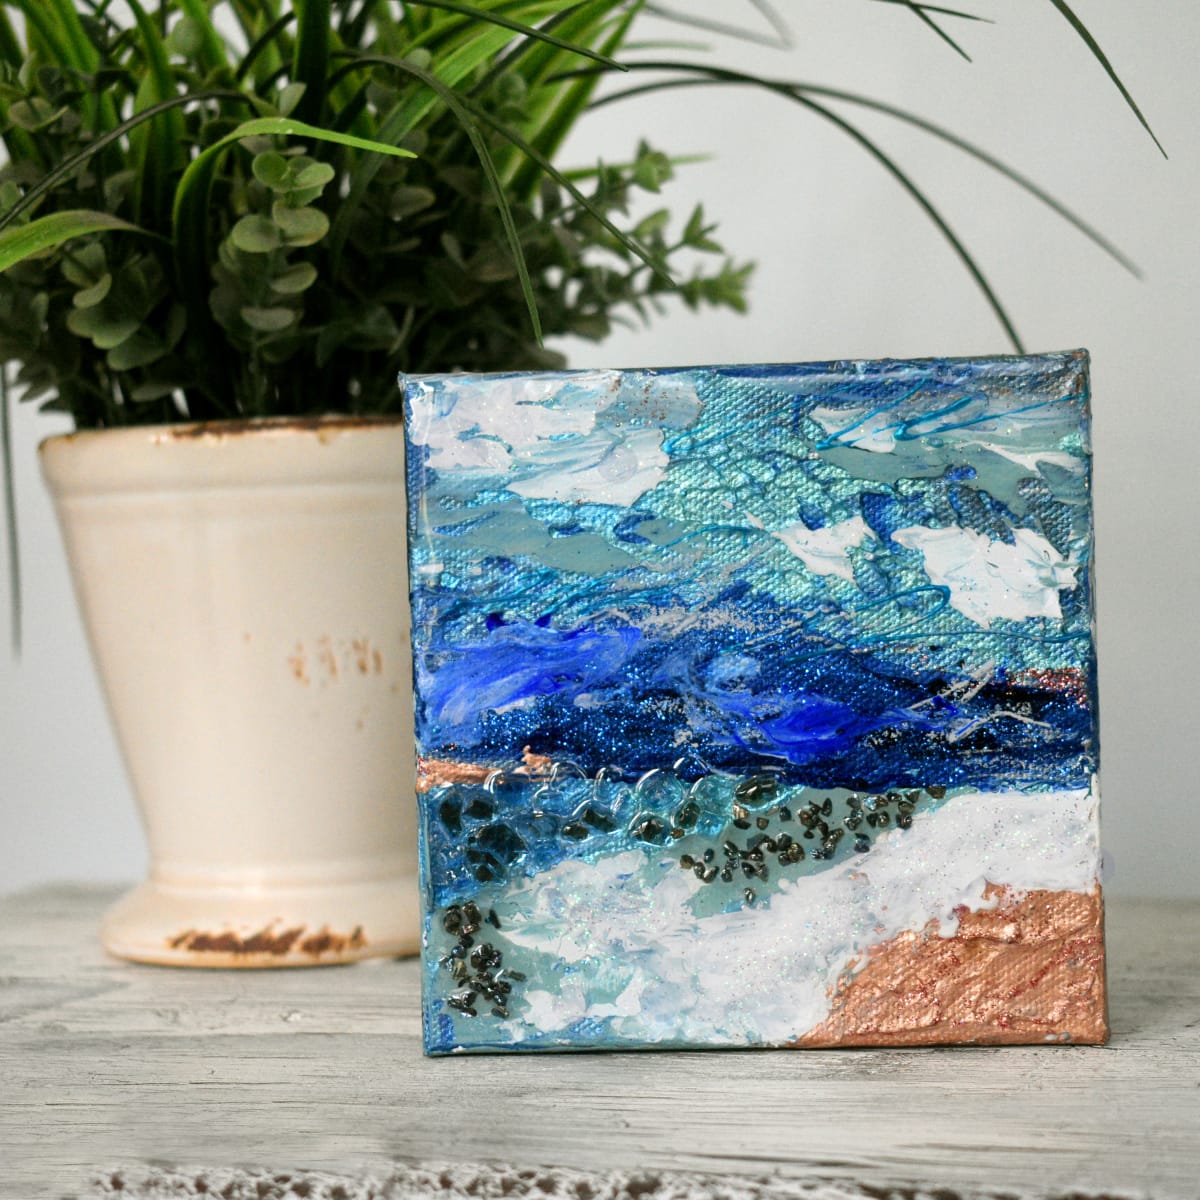 "Turbulence" by Dawn South  Image: From the “She Remains Untamed” Collection.
“Turbulence”
Mini canvas/Shelf Sitter
5″ x 5″ mixed media with resin